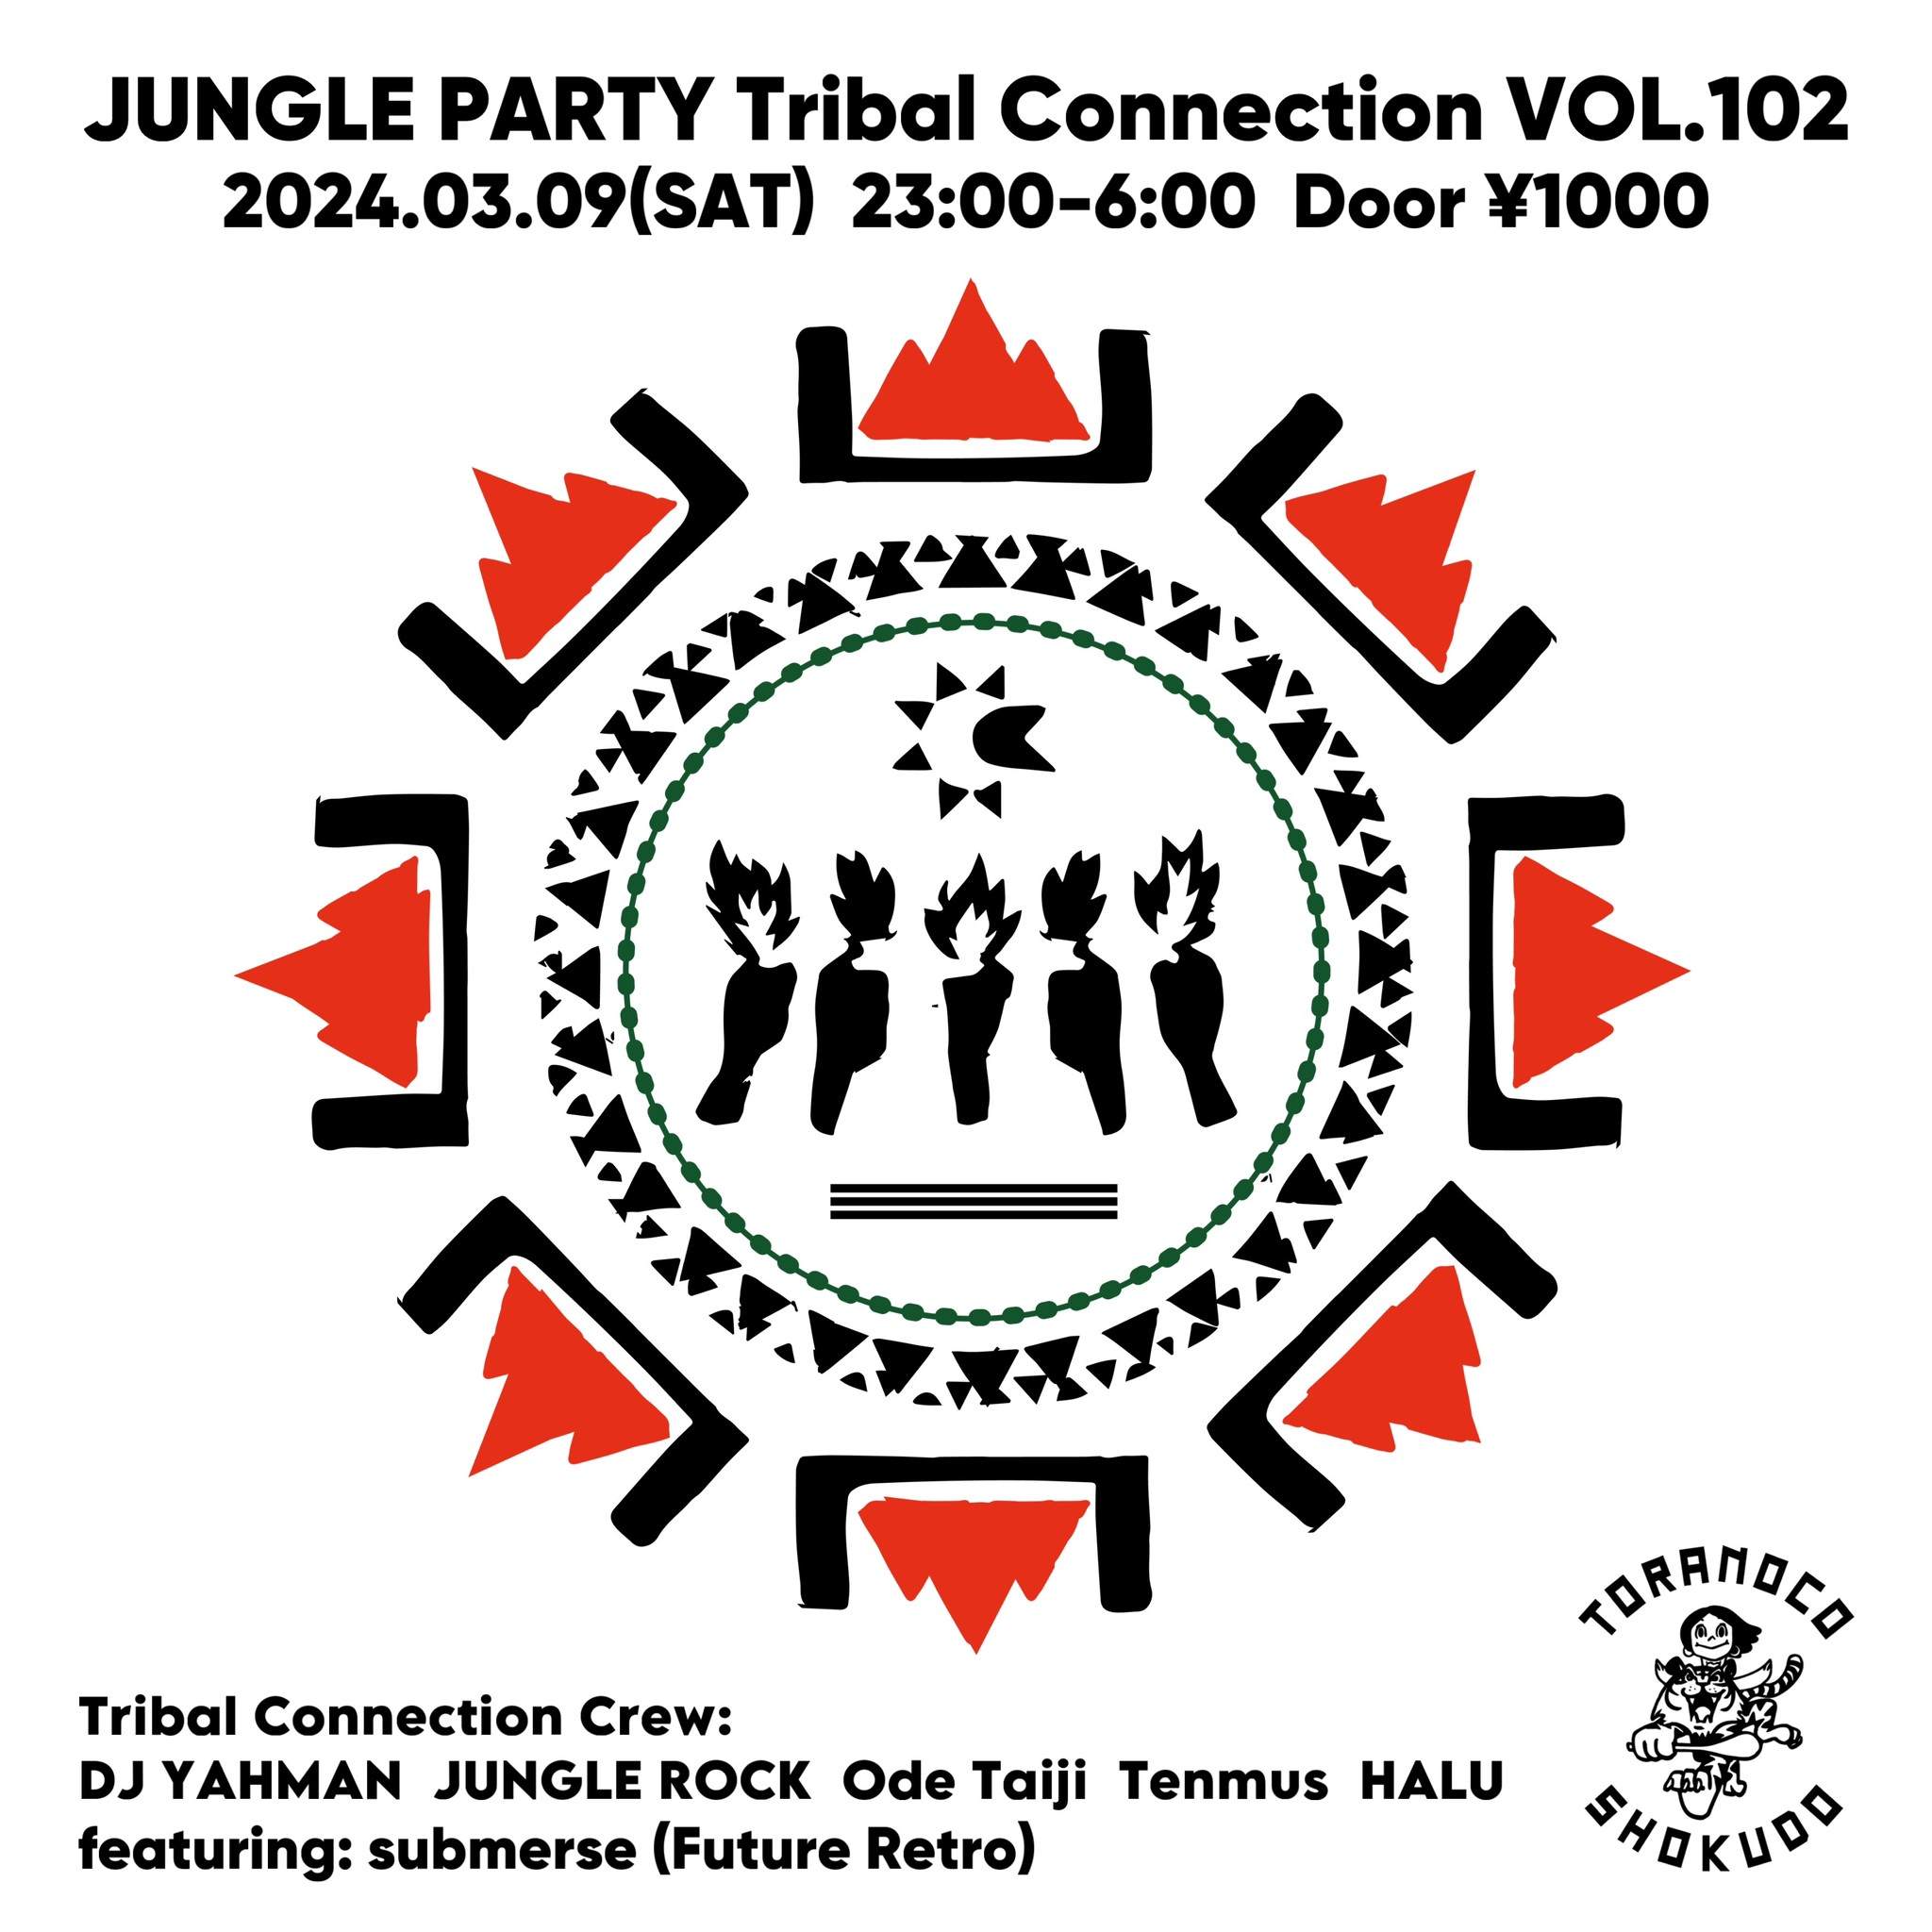 Jungle Party Tribal Connection Vol.102 - フライヤー表